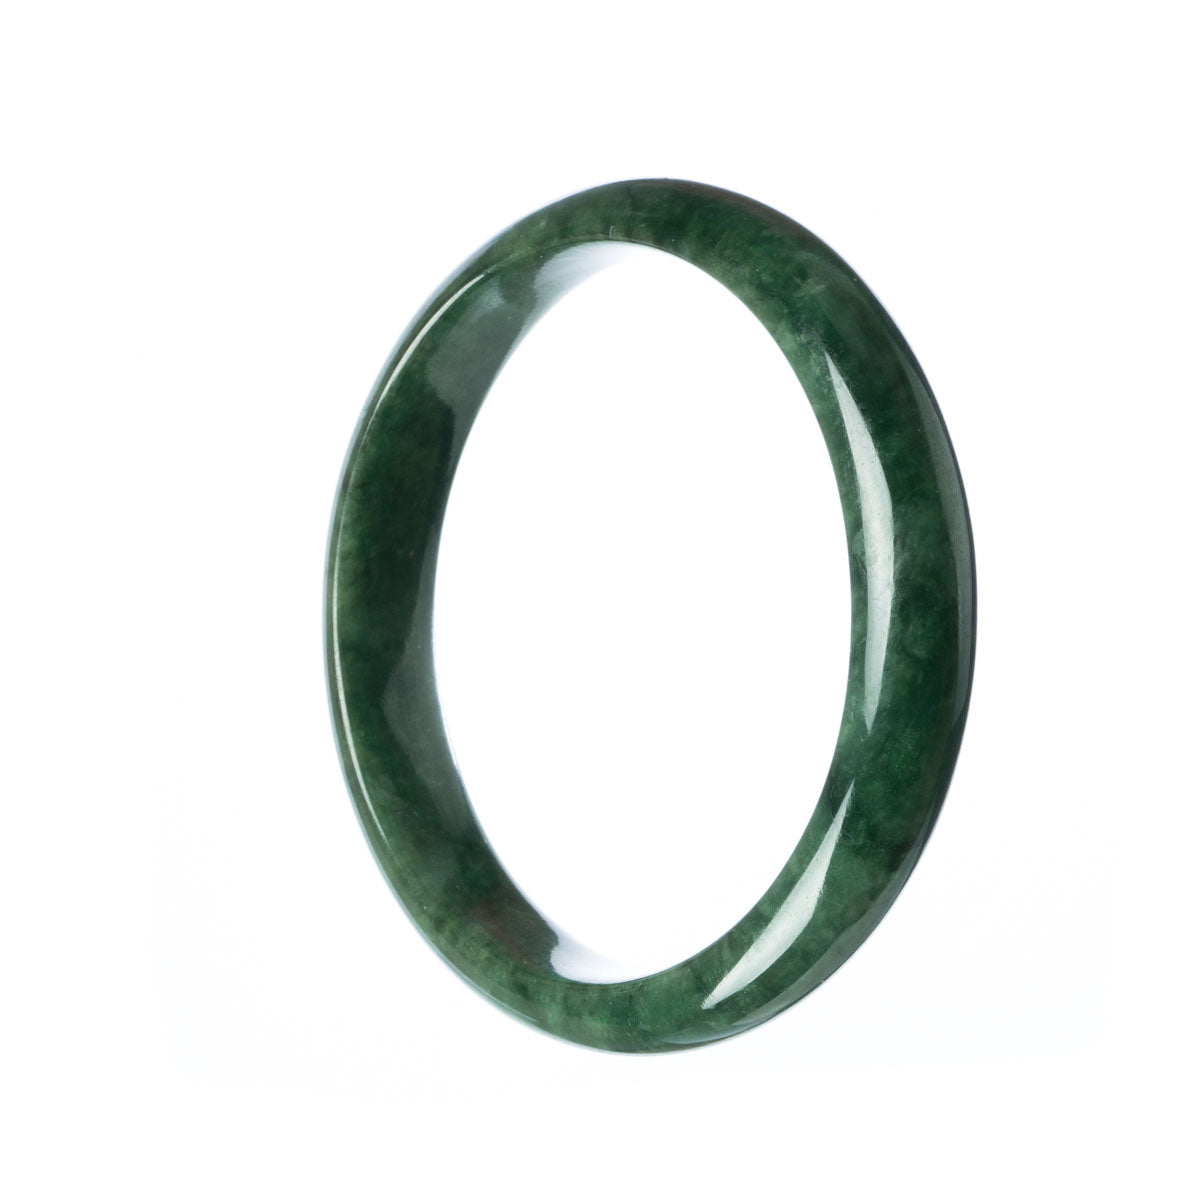 A close-up image of a dark green jadeite bracelet with a smooth, half-moon shape. The bracelet is made of high-quality, certified Grade A jadeite and is 60mm in size. It is a stunning piece of jewelry offered by MAYS GEMS.